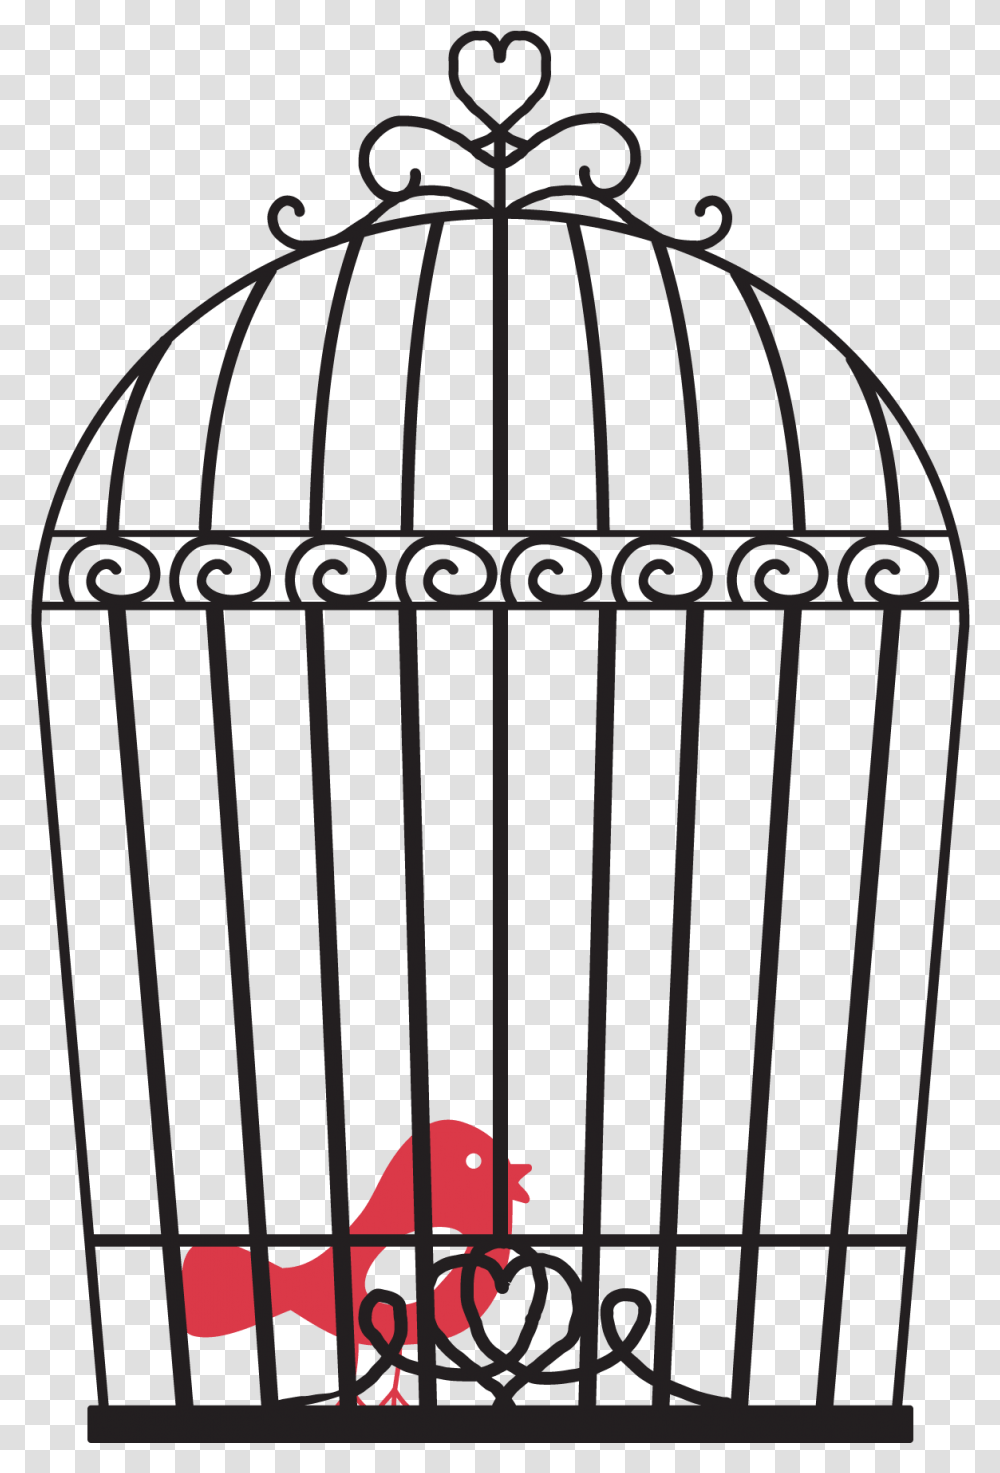 Cage Bird Image Bird In Cage, Gate, Grille Transparent Png